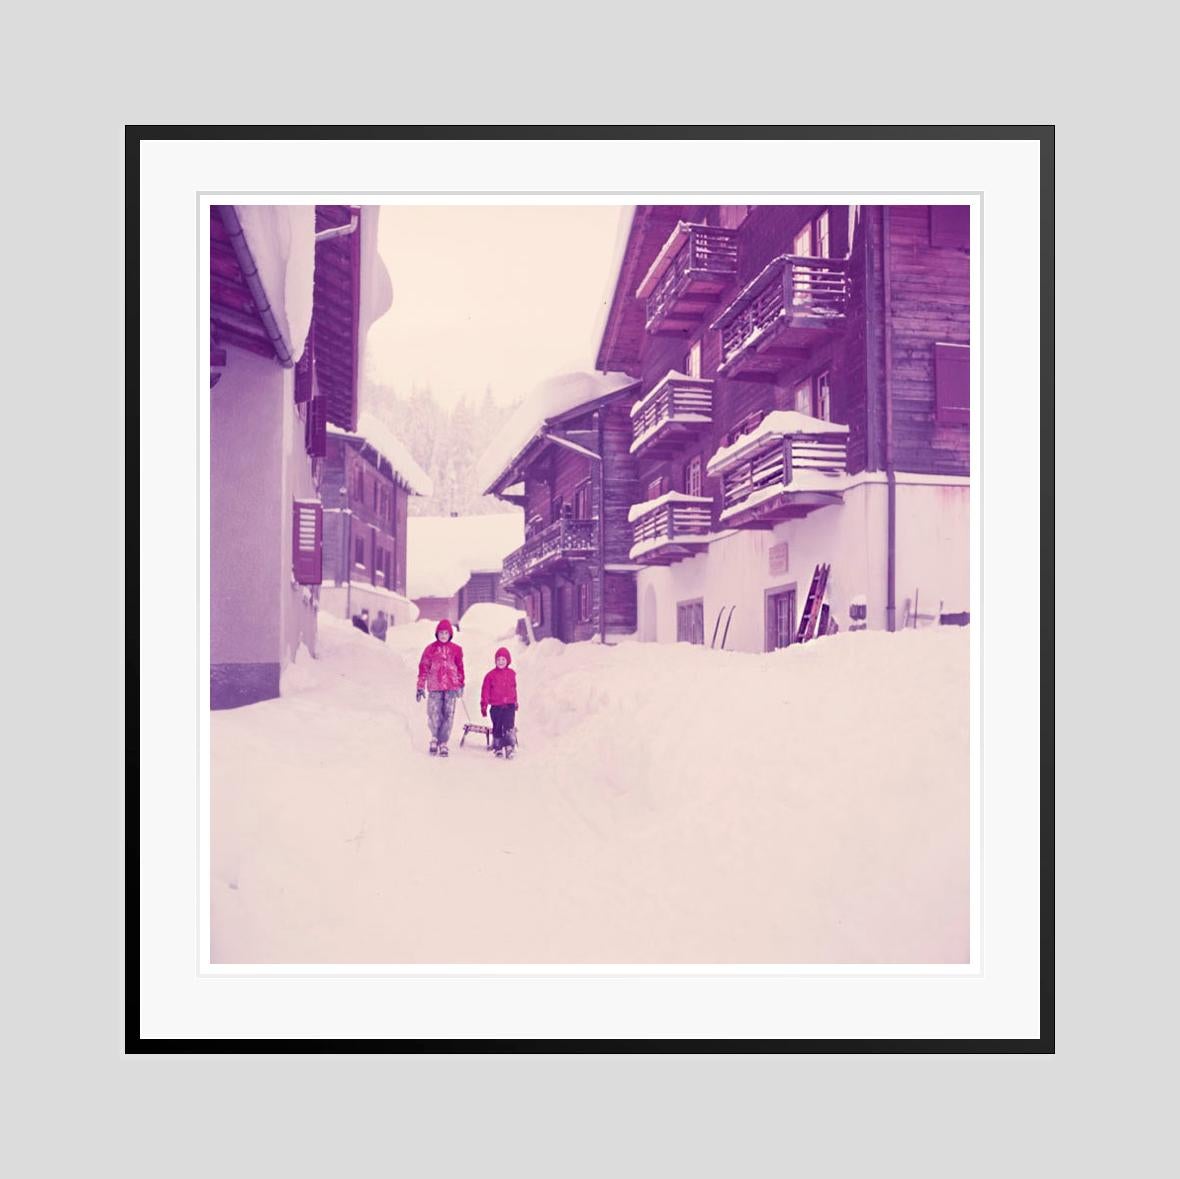 Sledging Trip 

1951

Two children drag their sledge through the streets, Klosters, Switzerland, 1951

by Toni Frissell

40 x 40